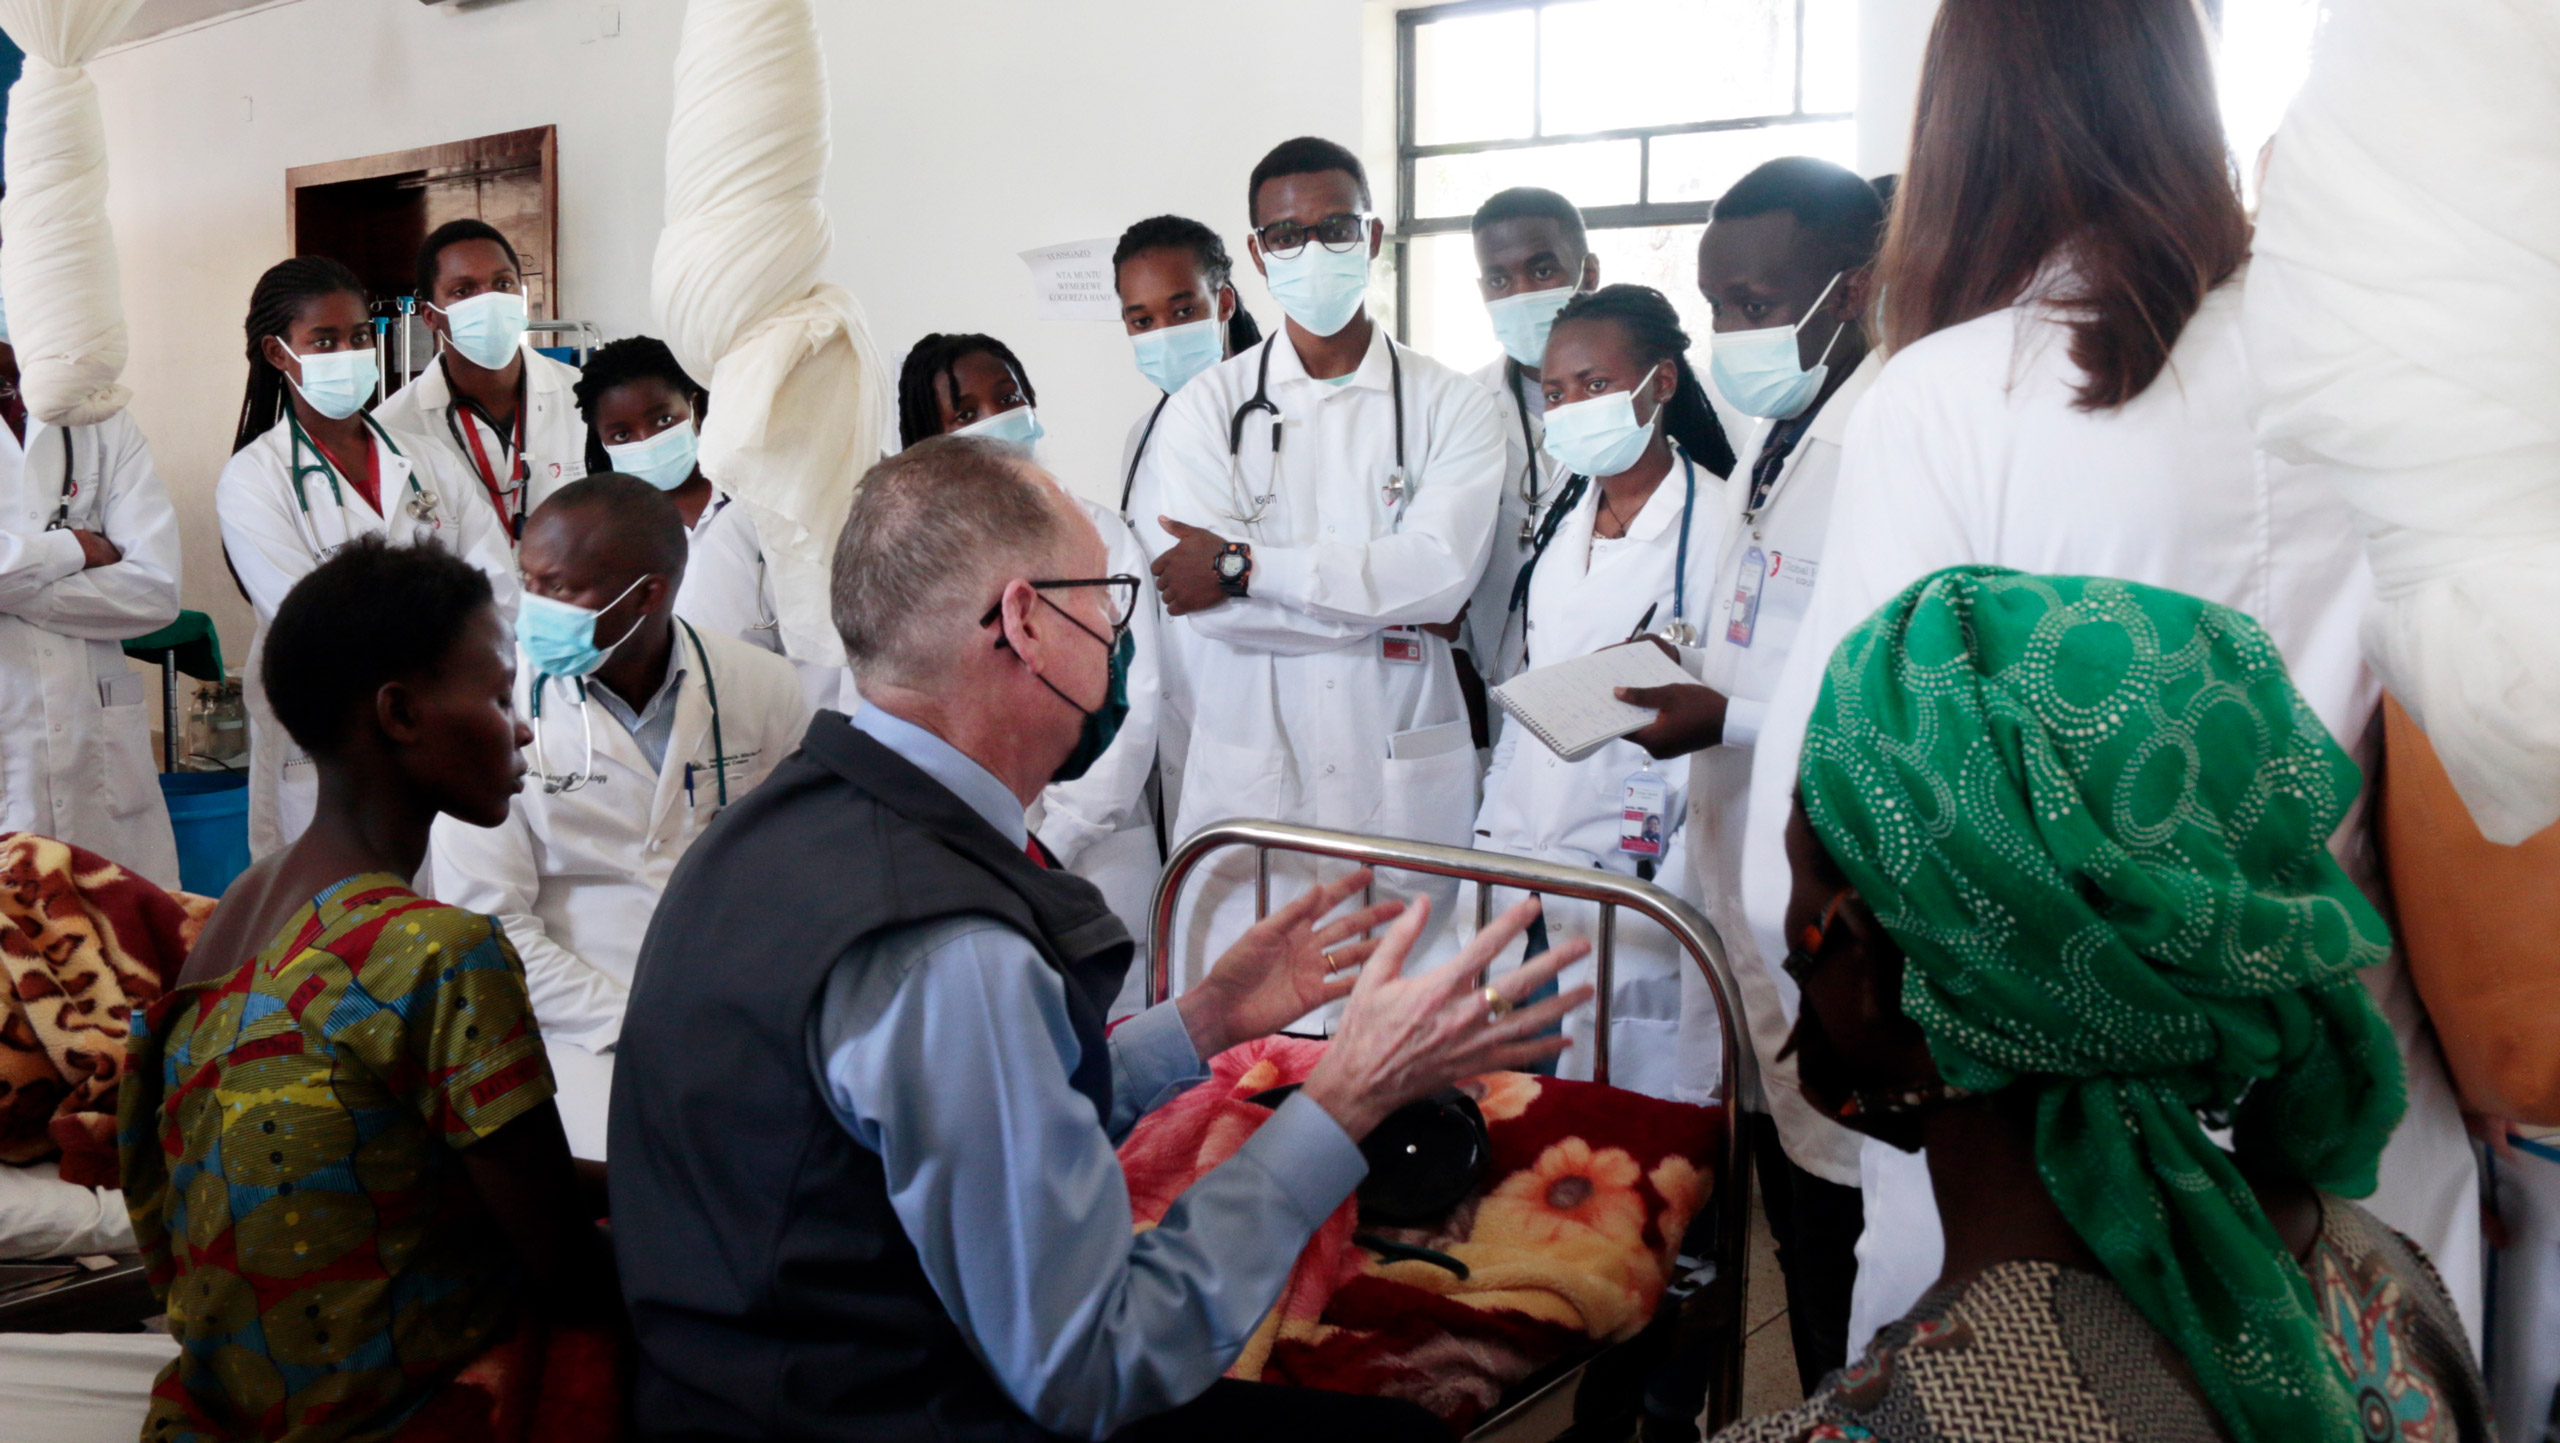 Dr. Farmer on rounds with a group of students